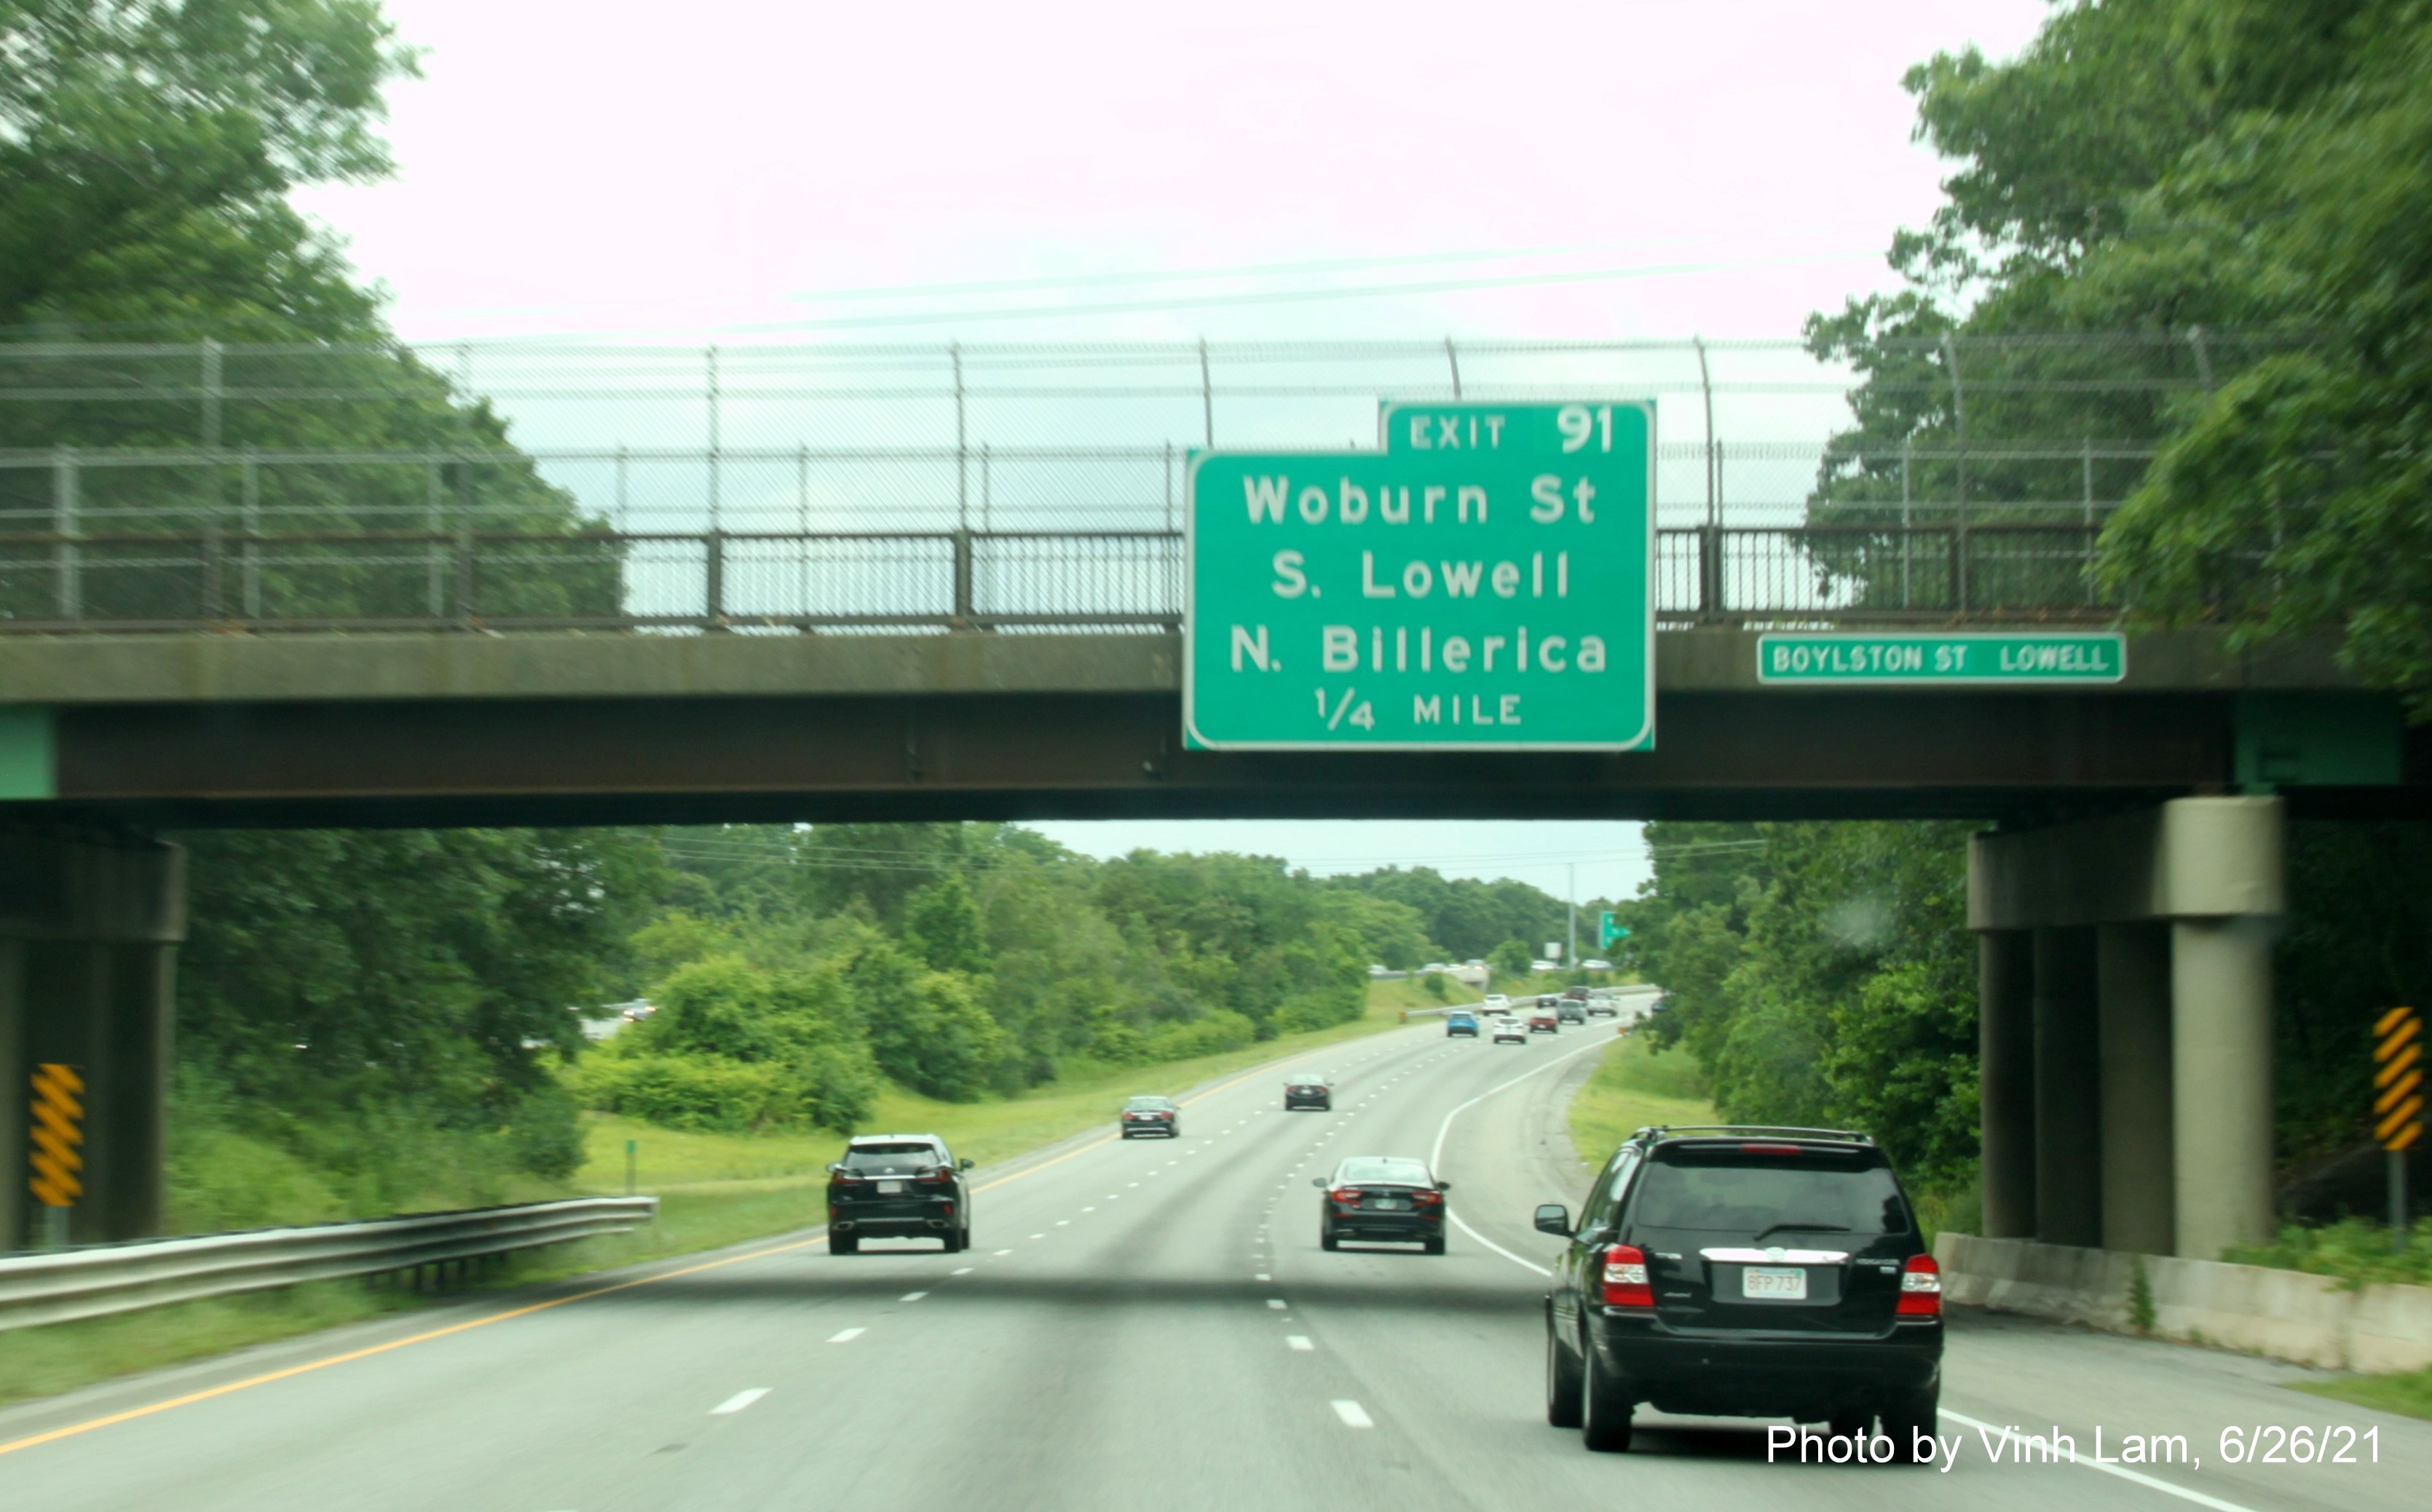 Image of 1/4 Mile advance bridge mounted sign for Woburn Street exit with new milepost based exit number on I-495 South in Lowell, by Vinh Lam, June 2021